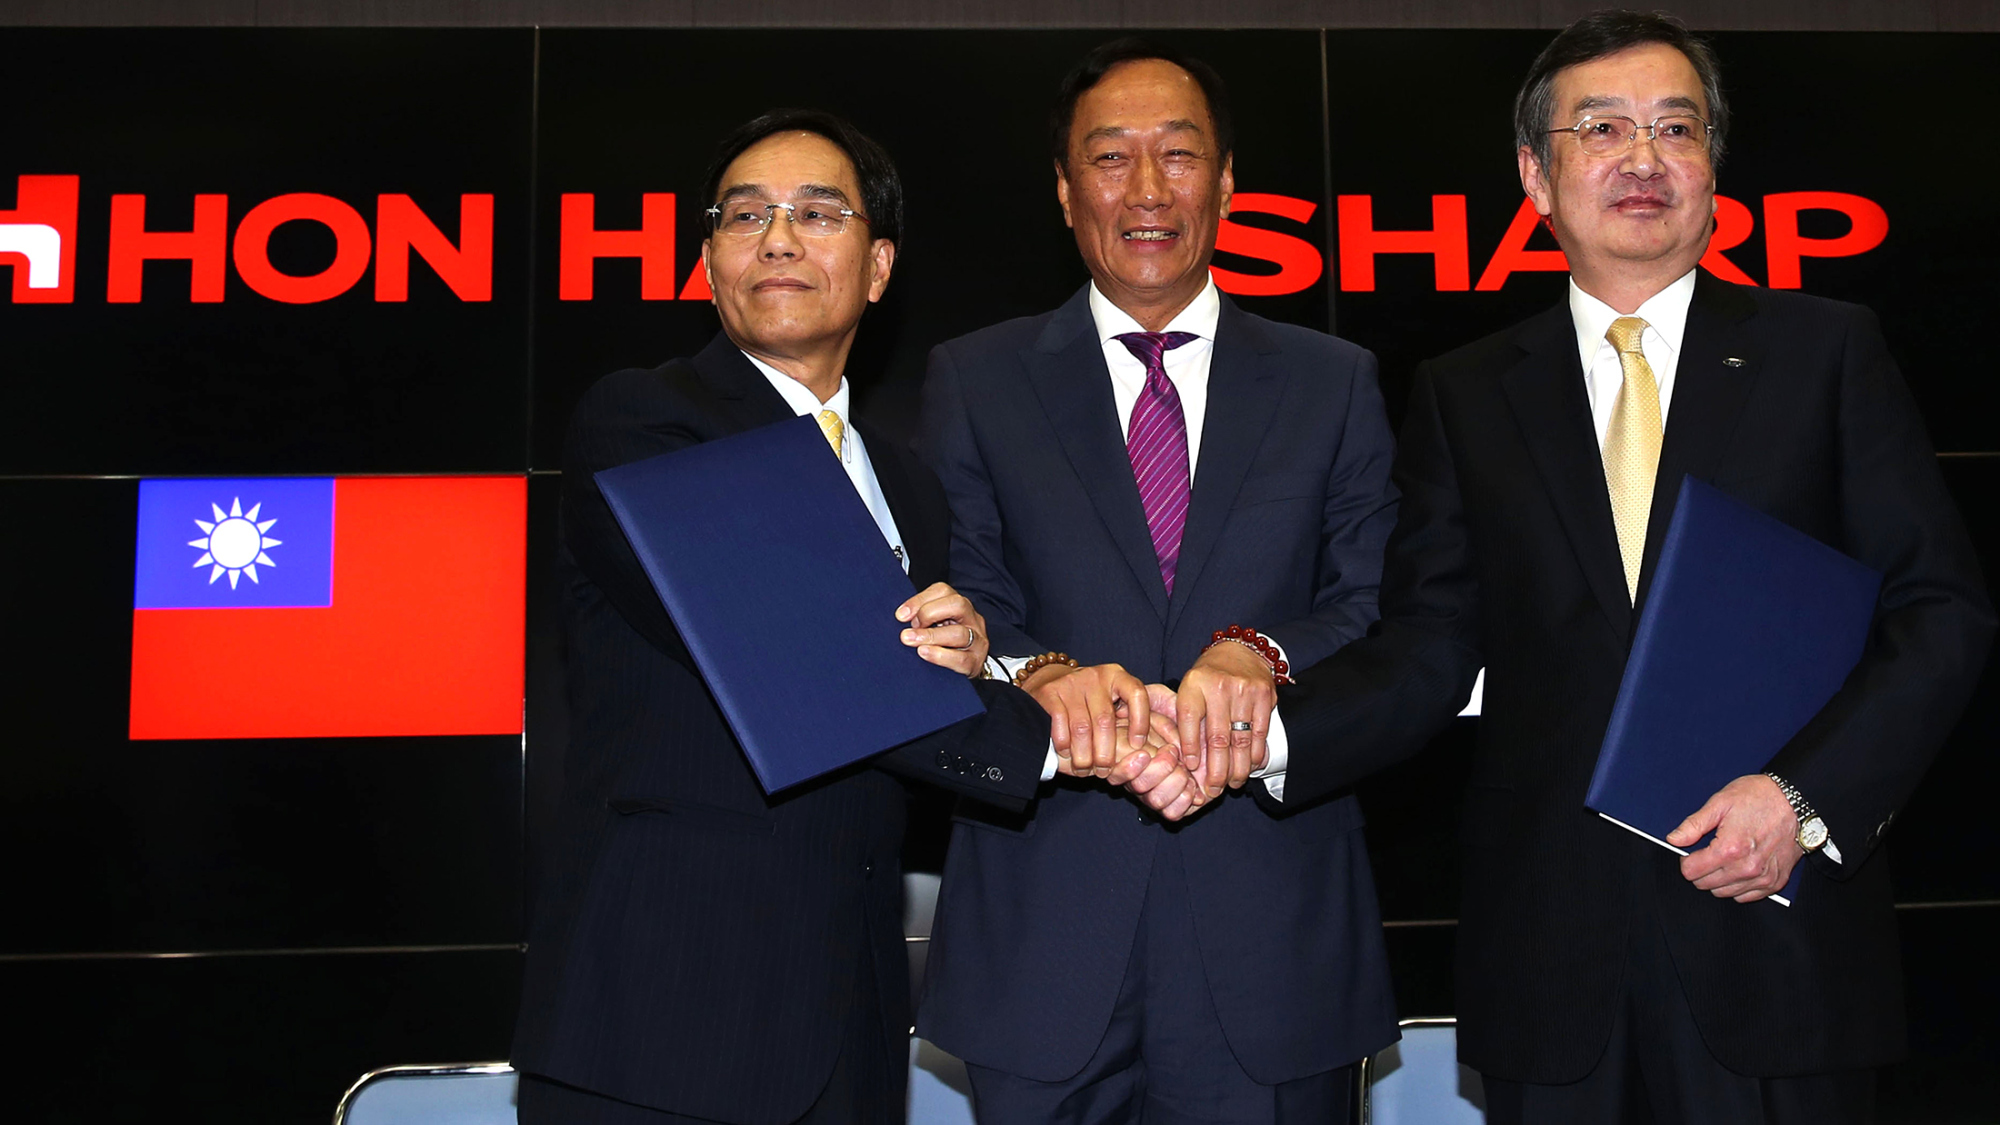 Tai Jeng-wu, vice president of Foxconn Technology Group, left, shakes hands with Billionaire Terry Gou, chairman of Foxconn Technology Group, center, and Kozo Takahashi, president of Sharp Corp., during a news conference in Osaka, Japan, on Saturday, April 2, 2016.
